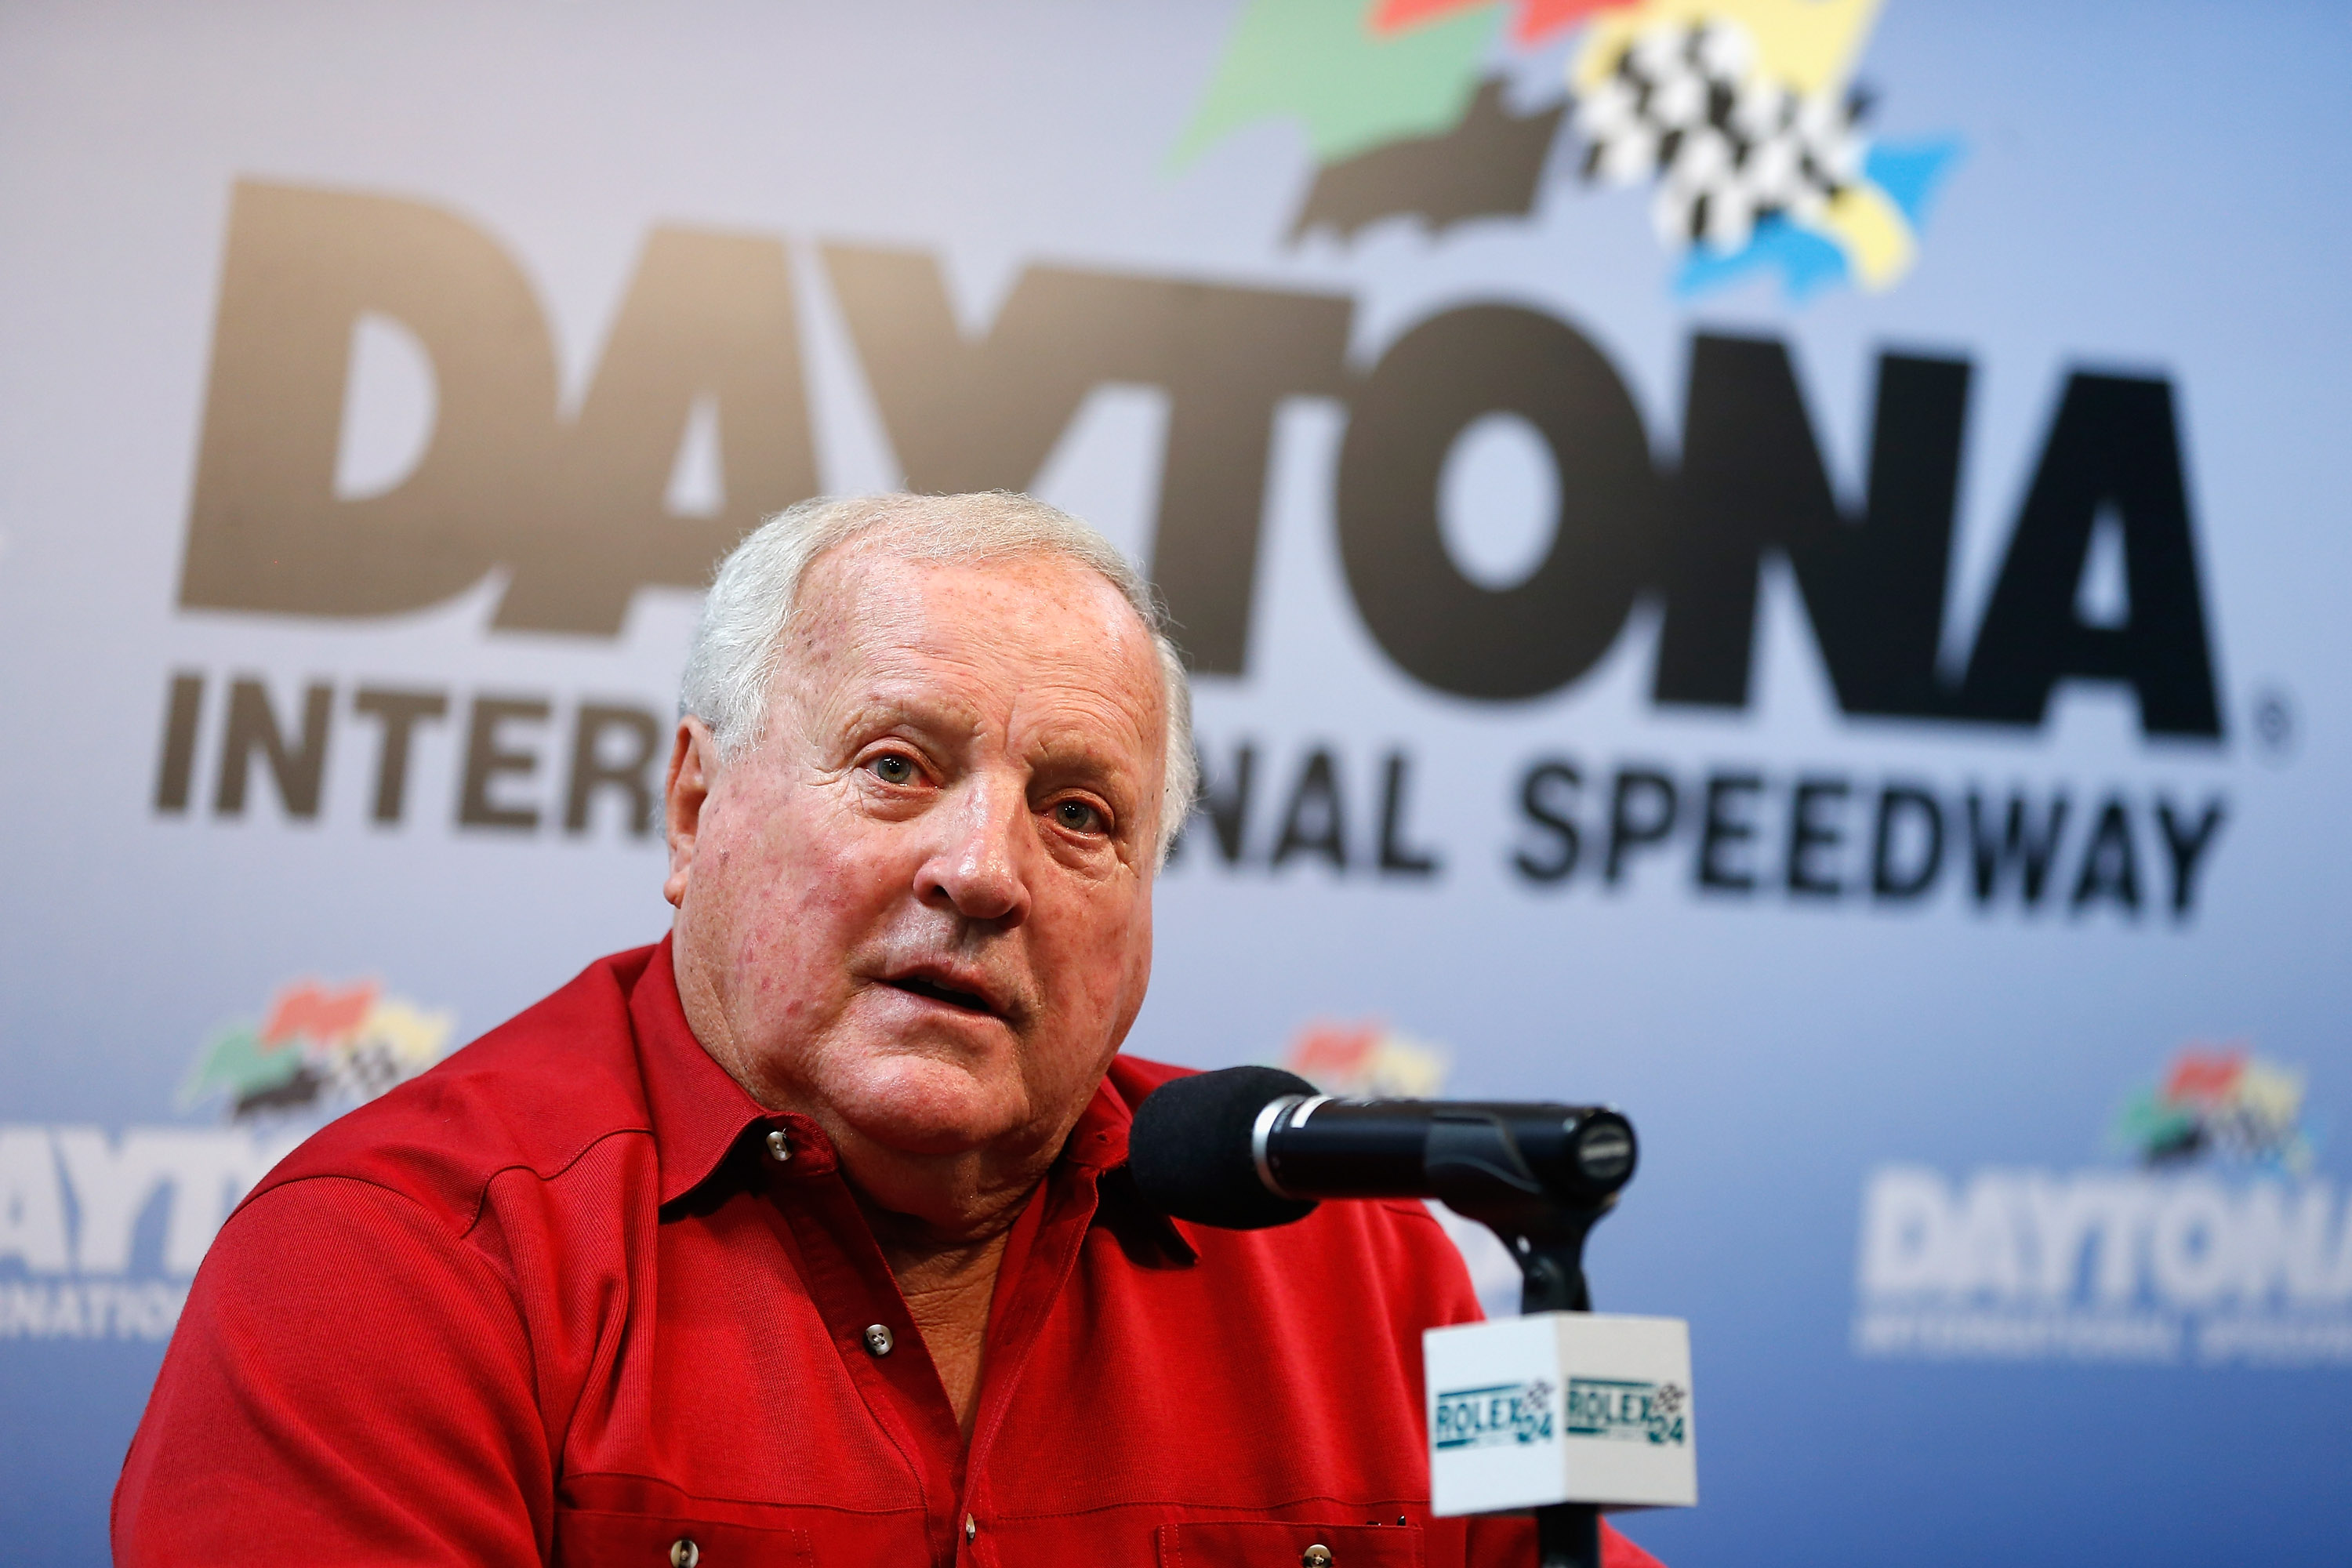 A.J. Foyt once wanted to be put out of his misery after a devastating crash.